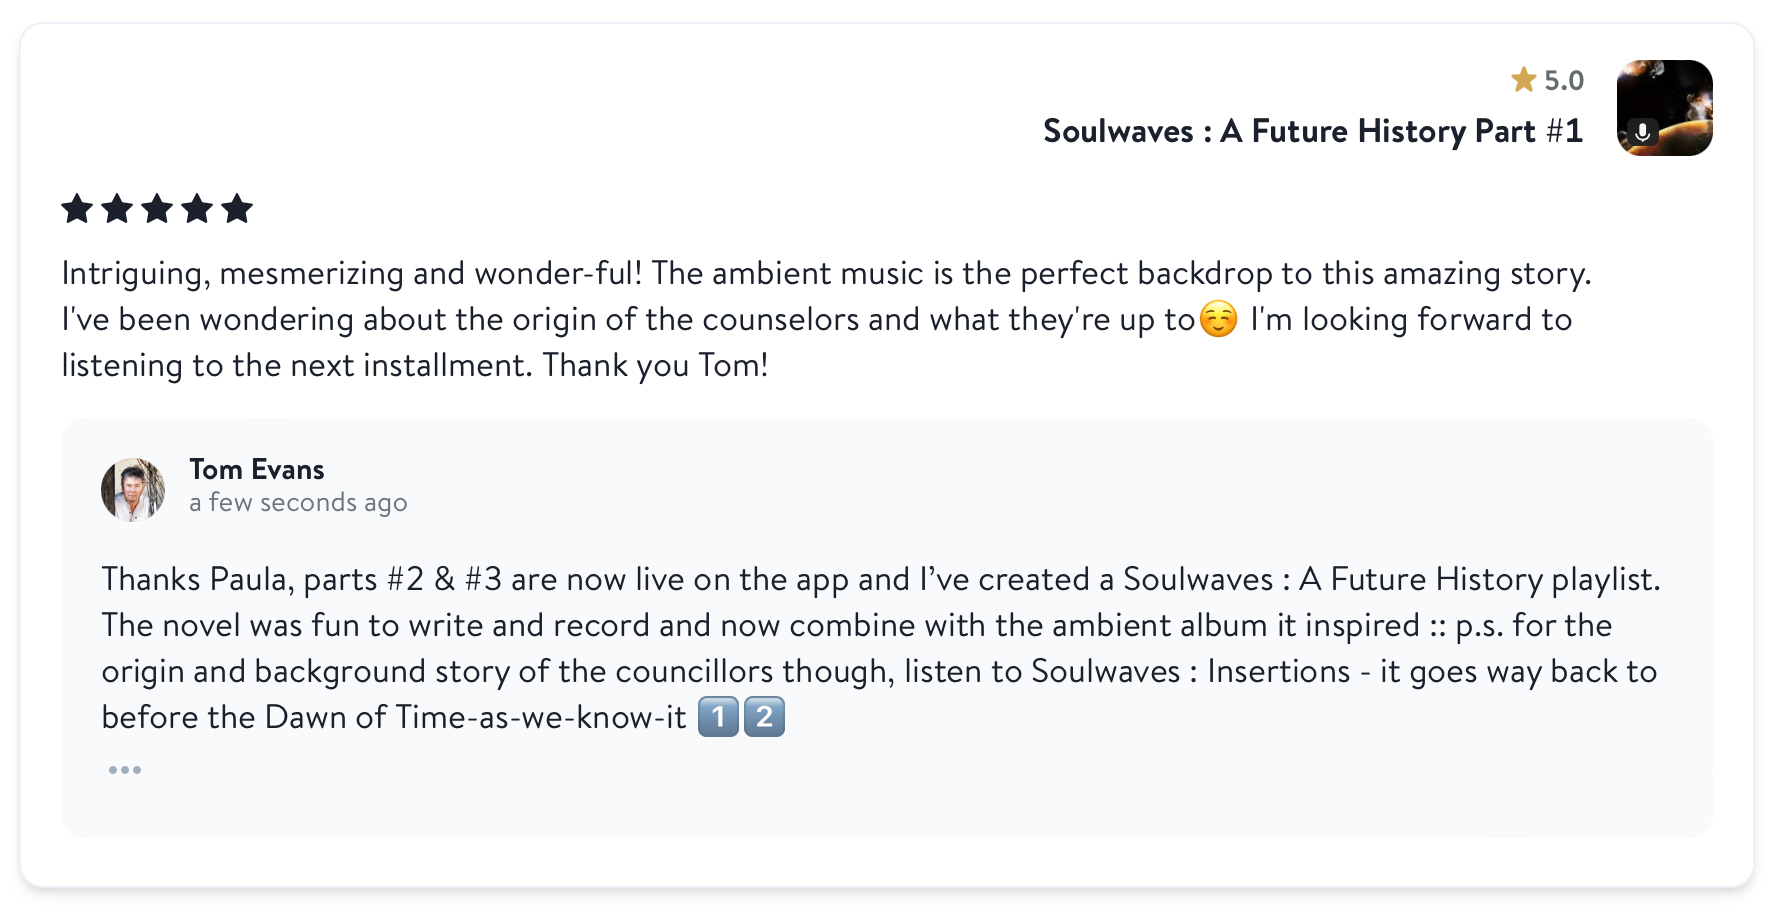 About Soulwaves